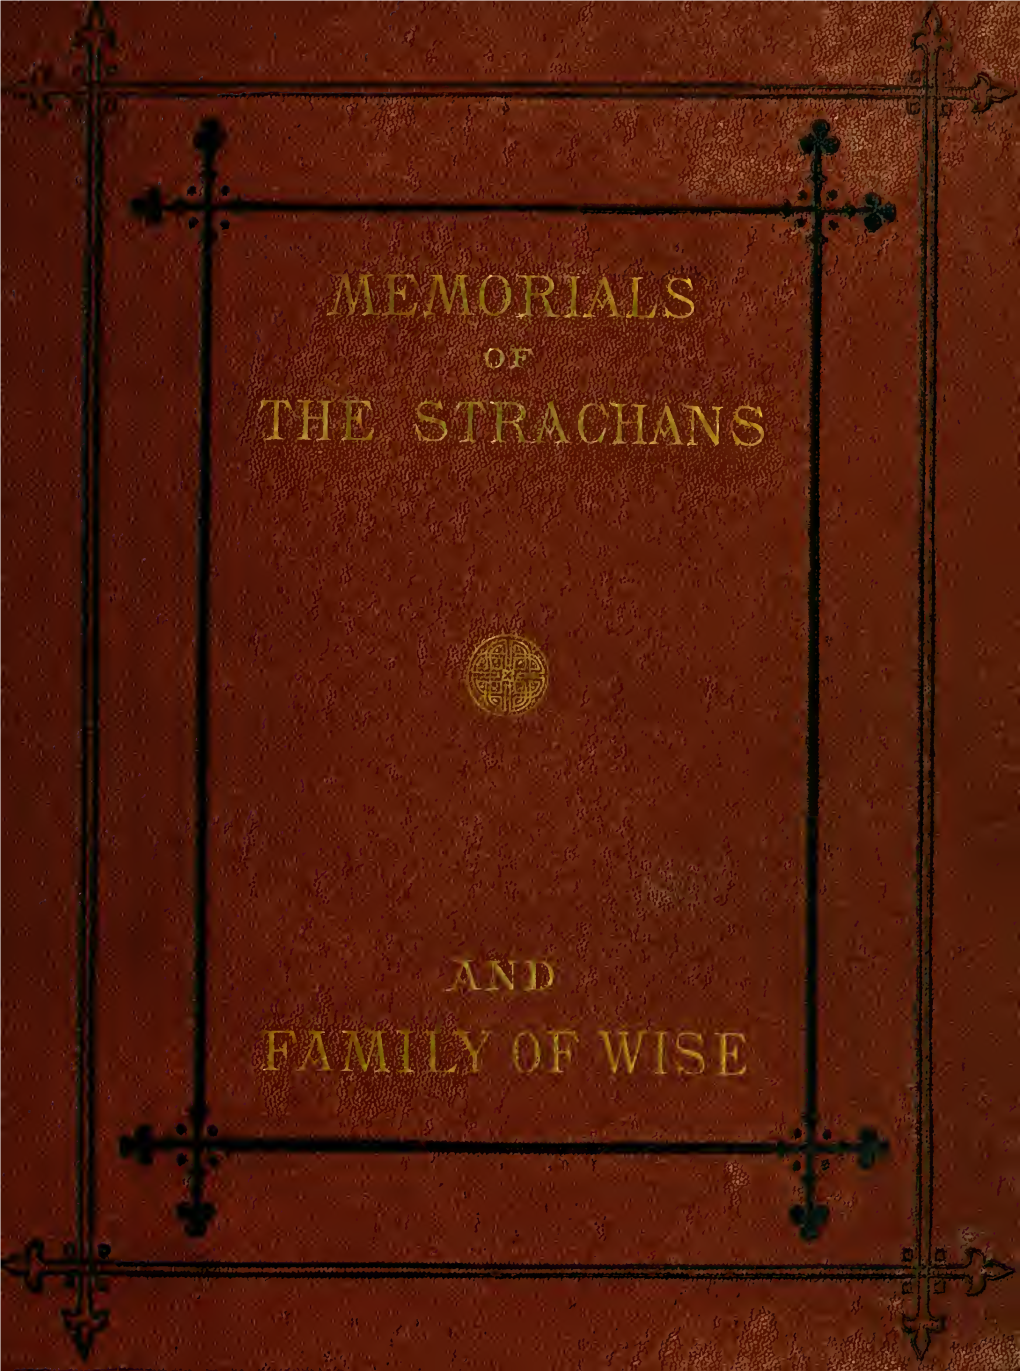 Memorials of the Scottish Families of Strachan and Wise